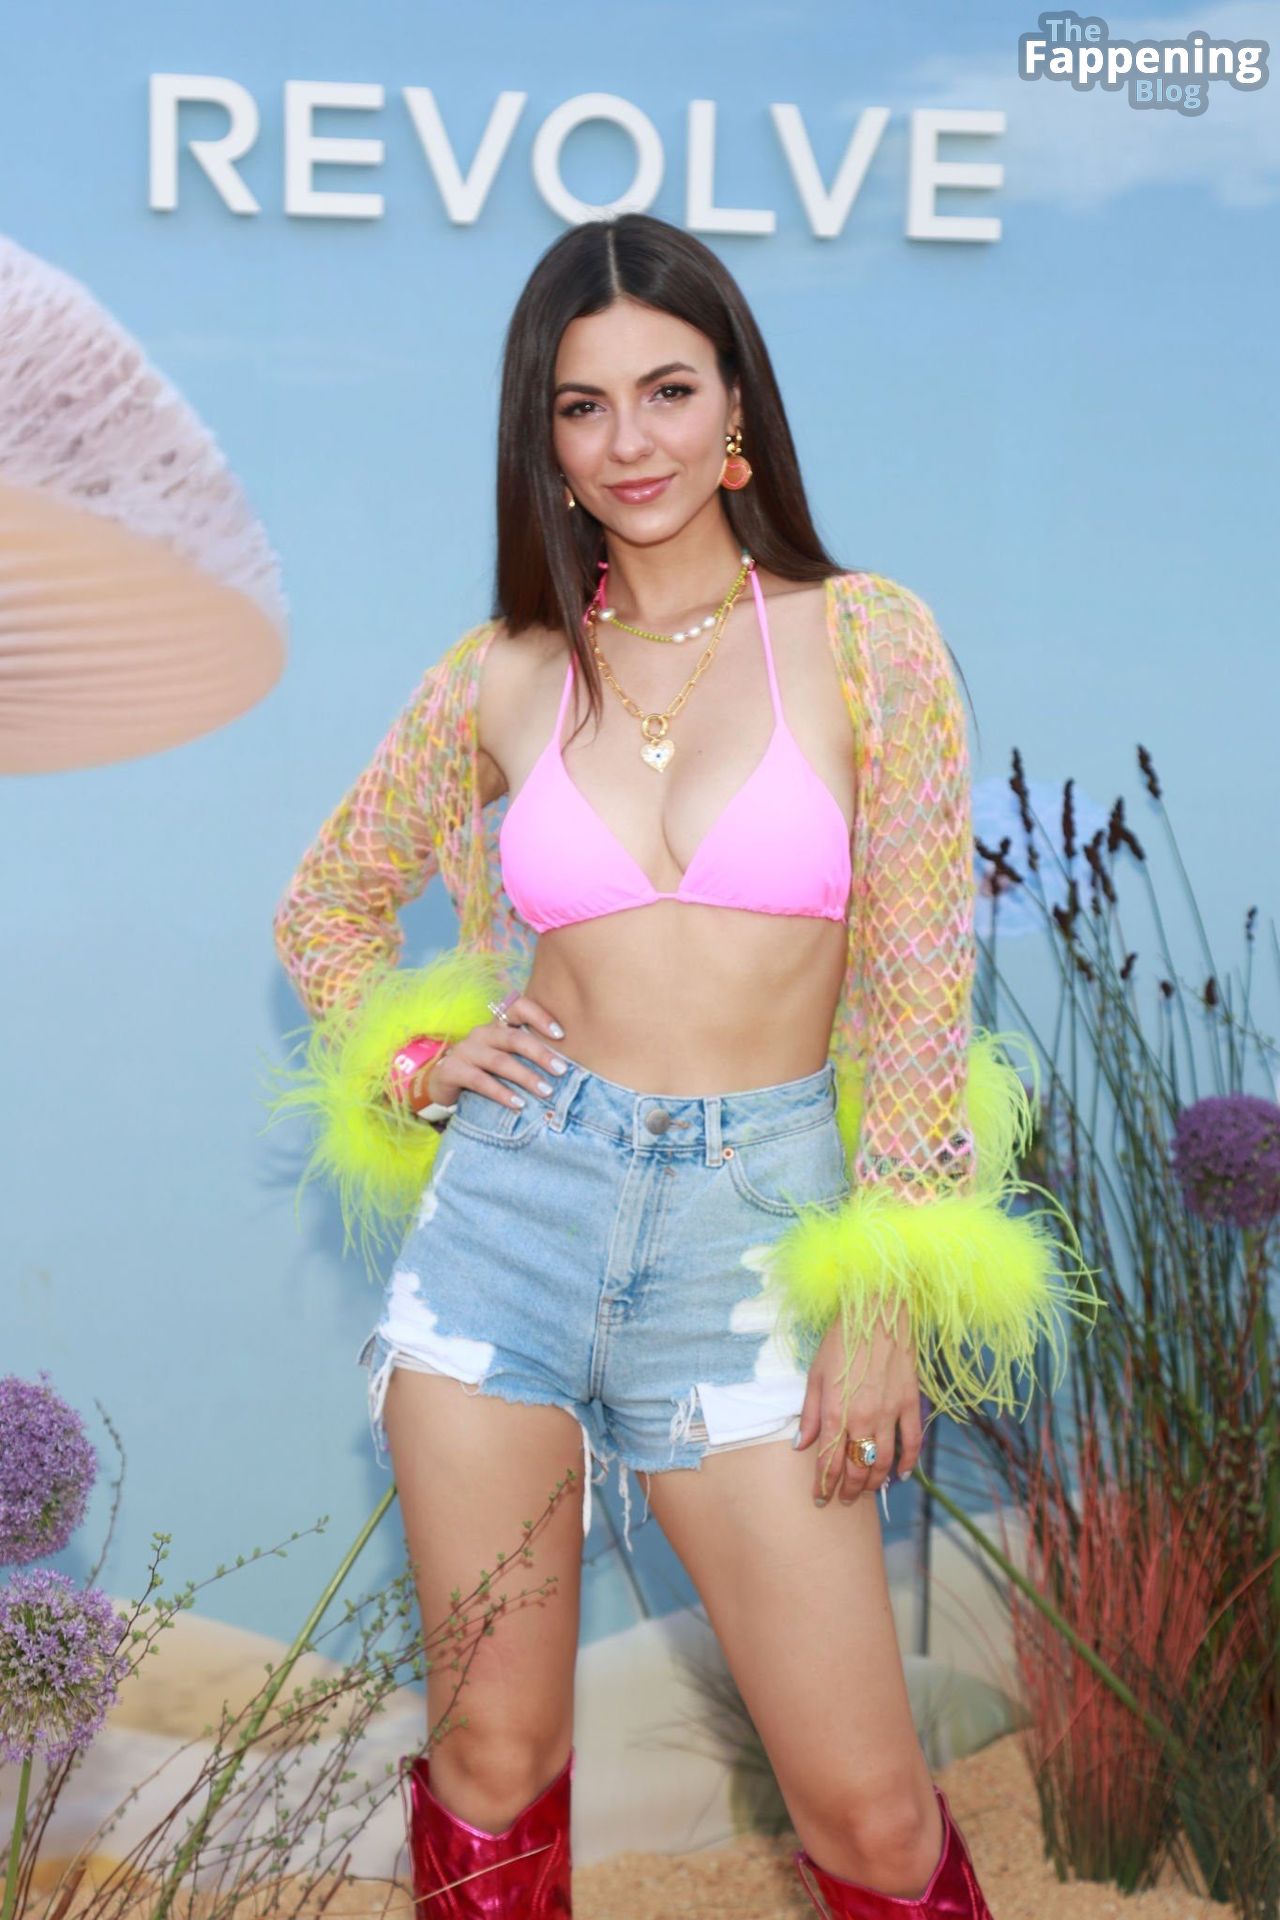 Victoria-Justice-Sexy-The-Fappening-Blog-19.jpg